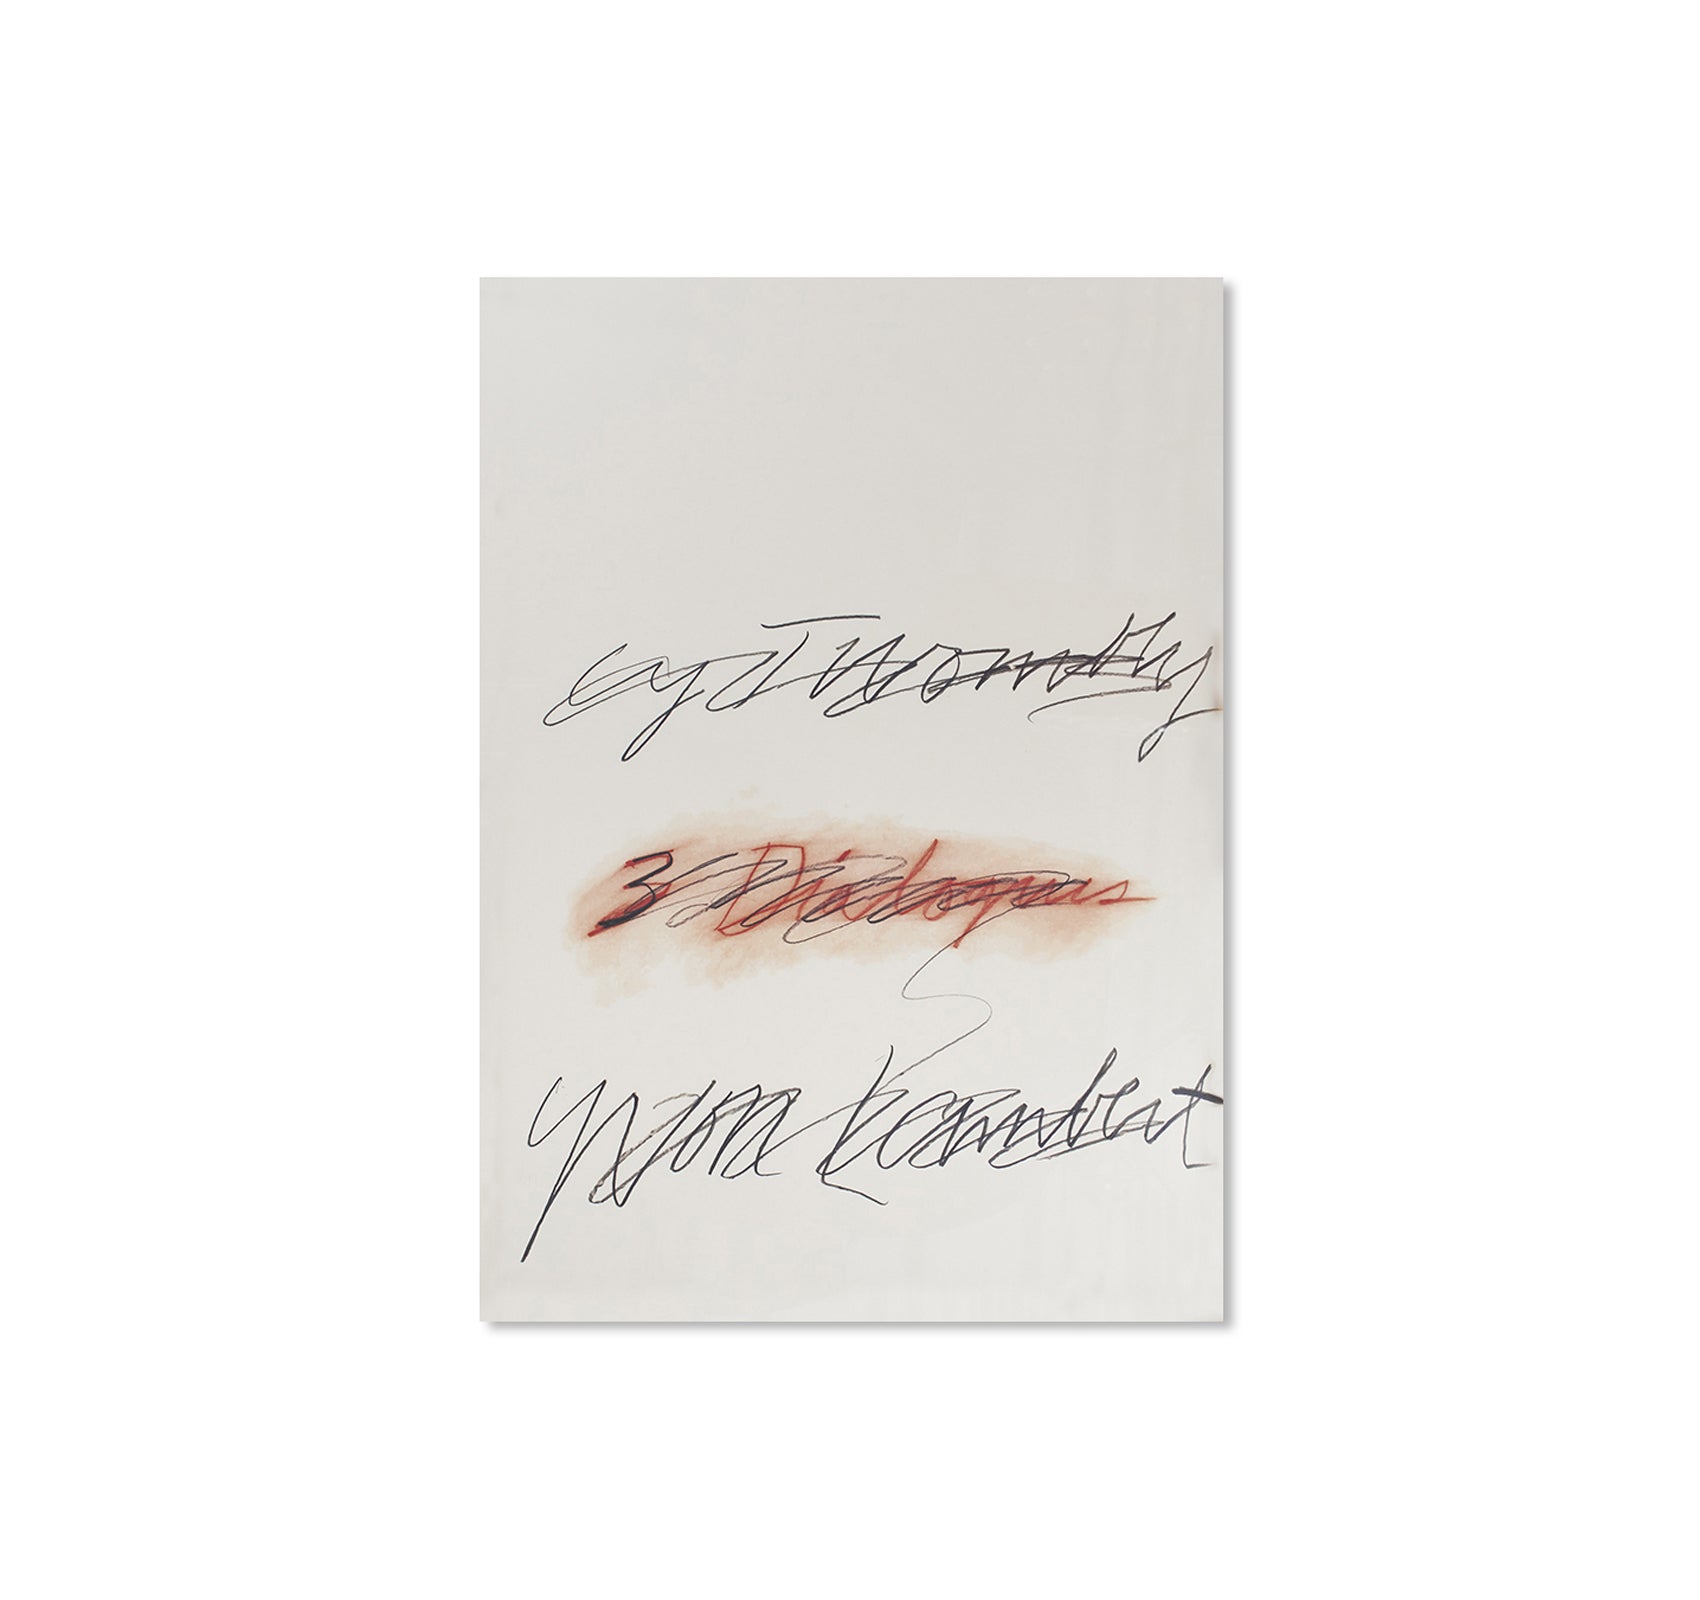 THREE DIALOGUES.2 PRINT (1977) by Cy Twombly